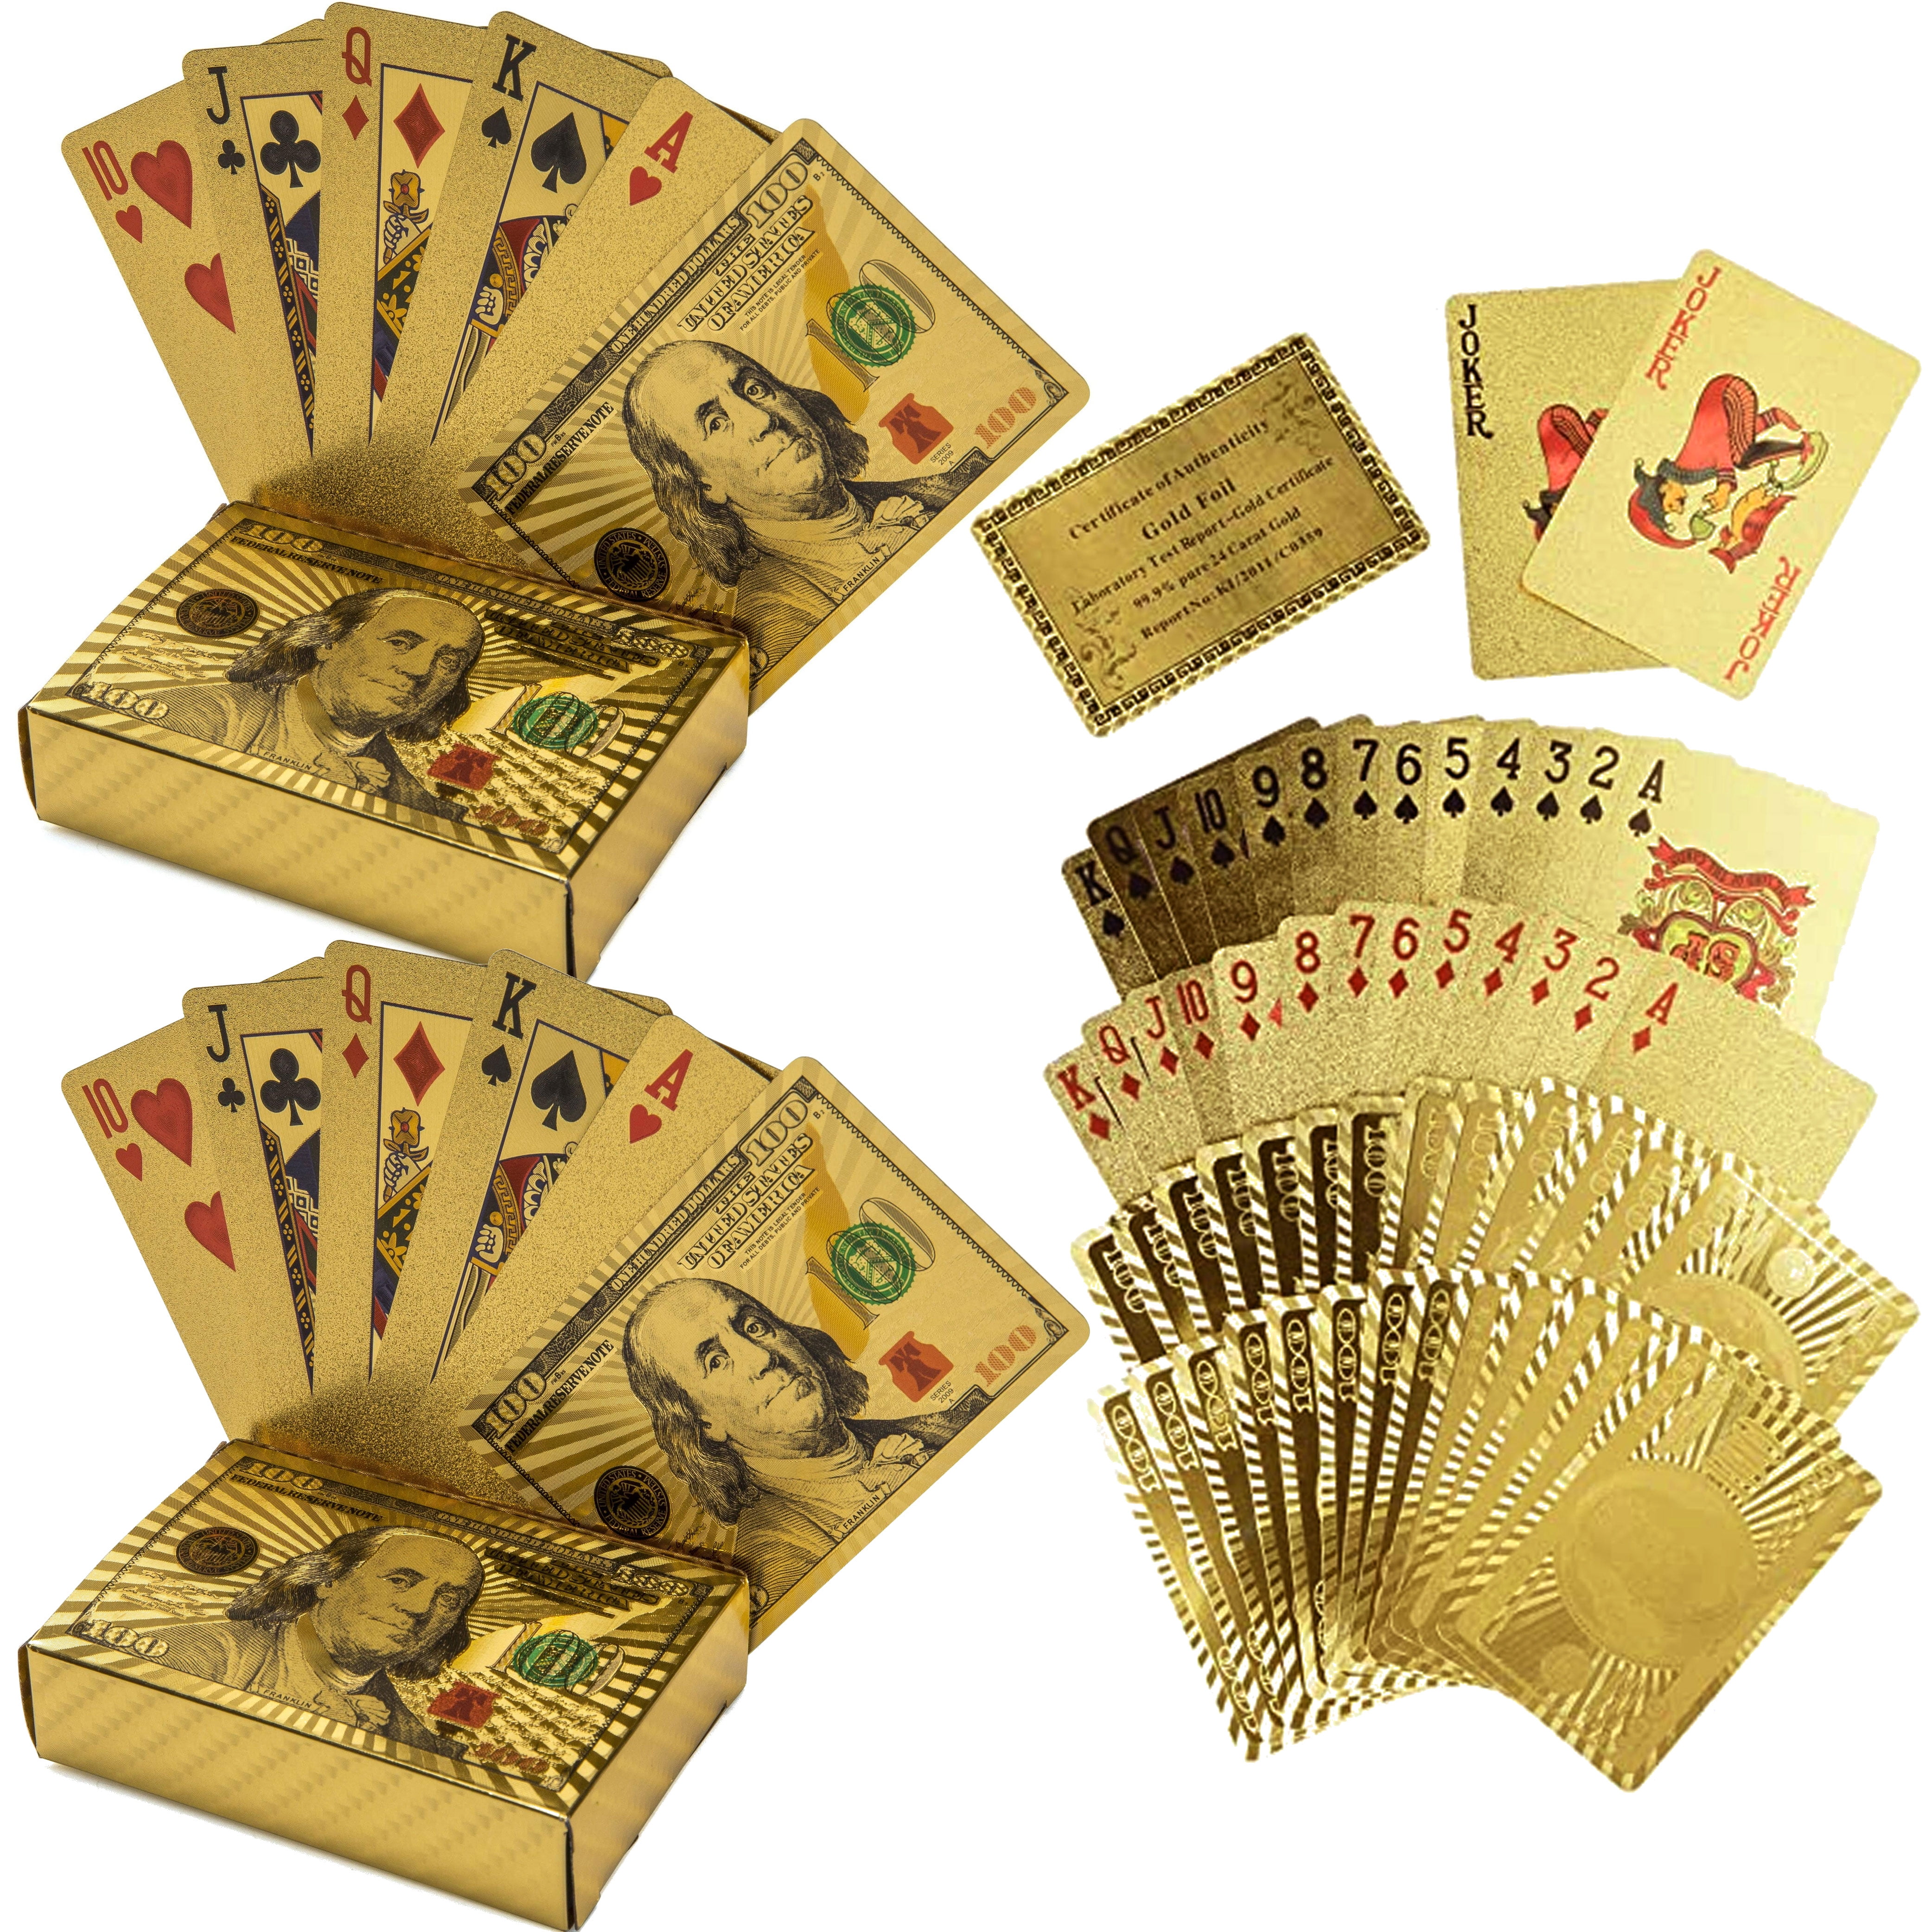 Luxury Waterproof Gold Foil Playing Cards $100 Dollar Design Poker with Wood Box Poker Cards 